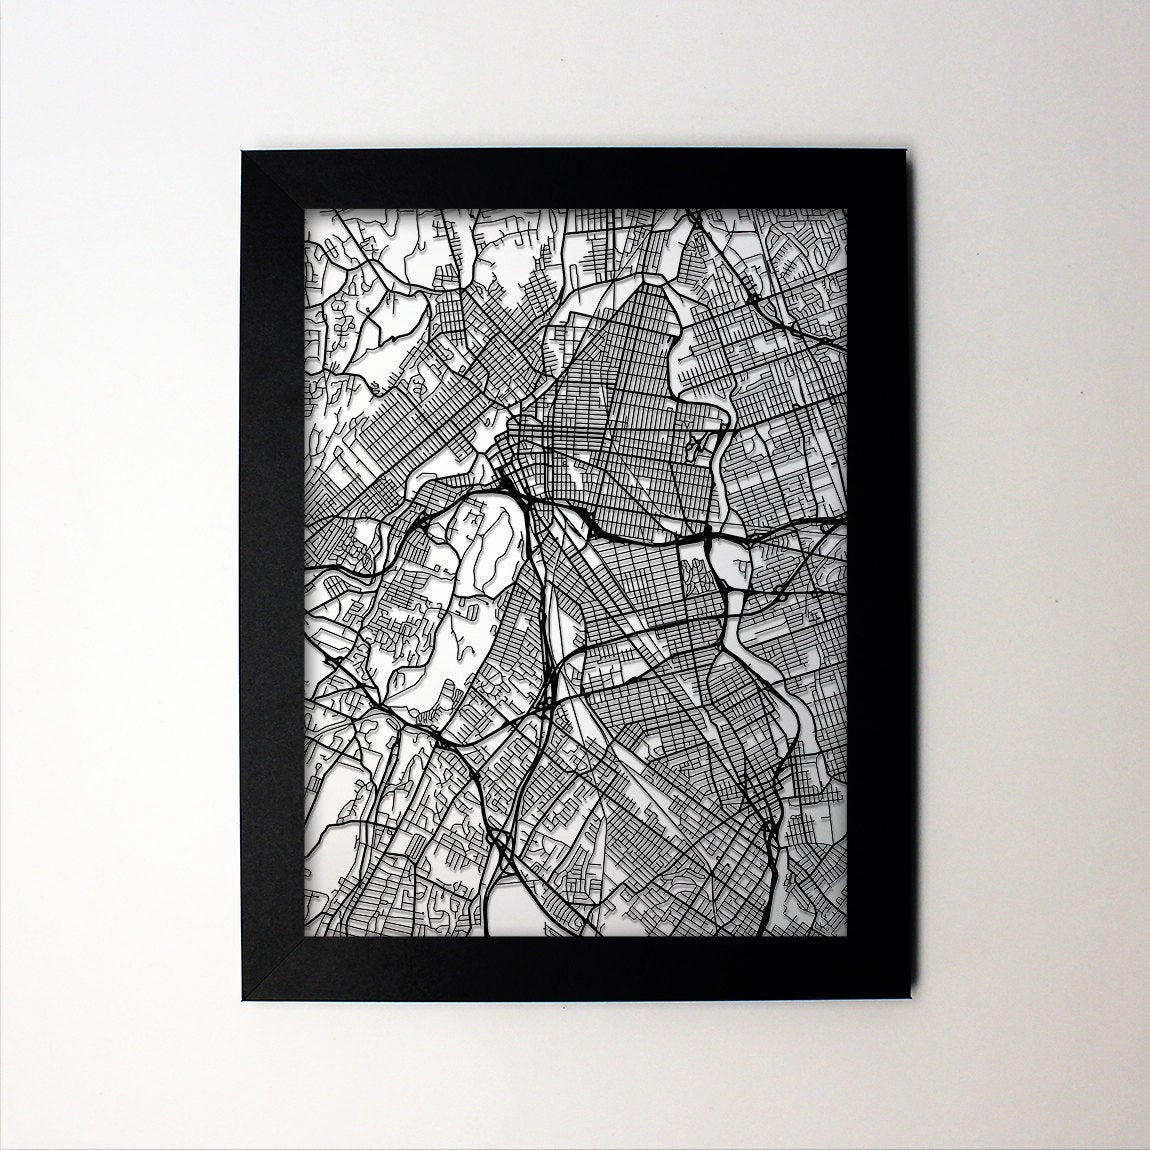 Paterson New Jersey framed laser cut map - CarbonLight